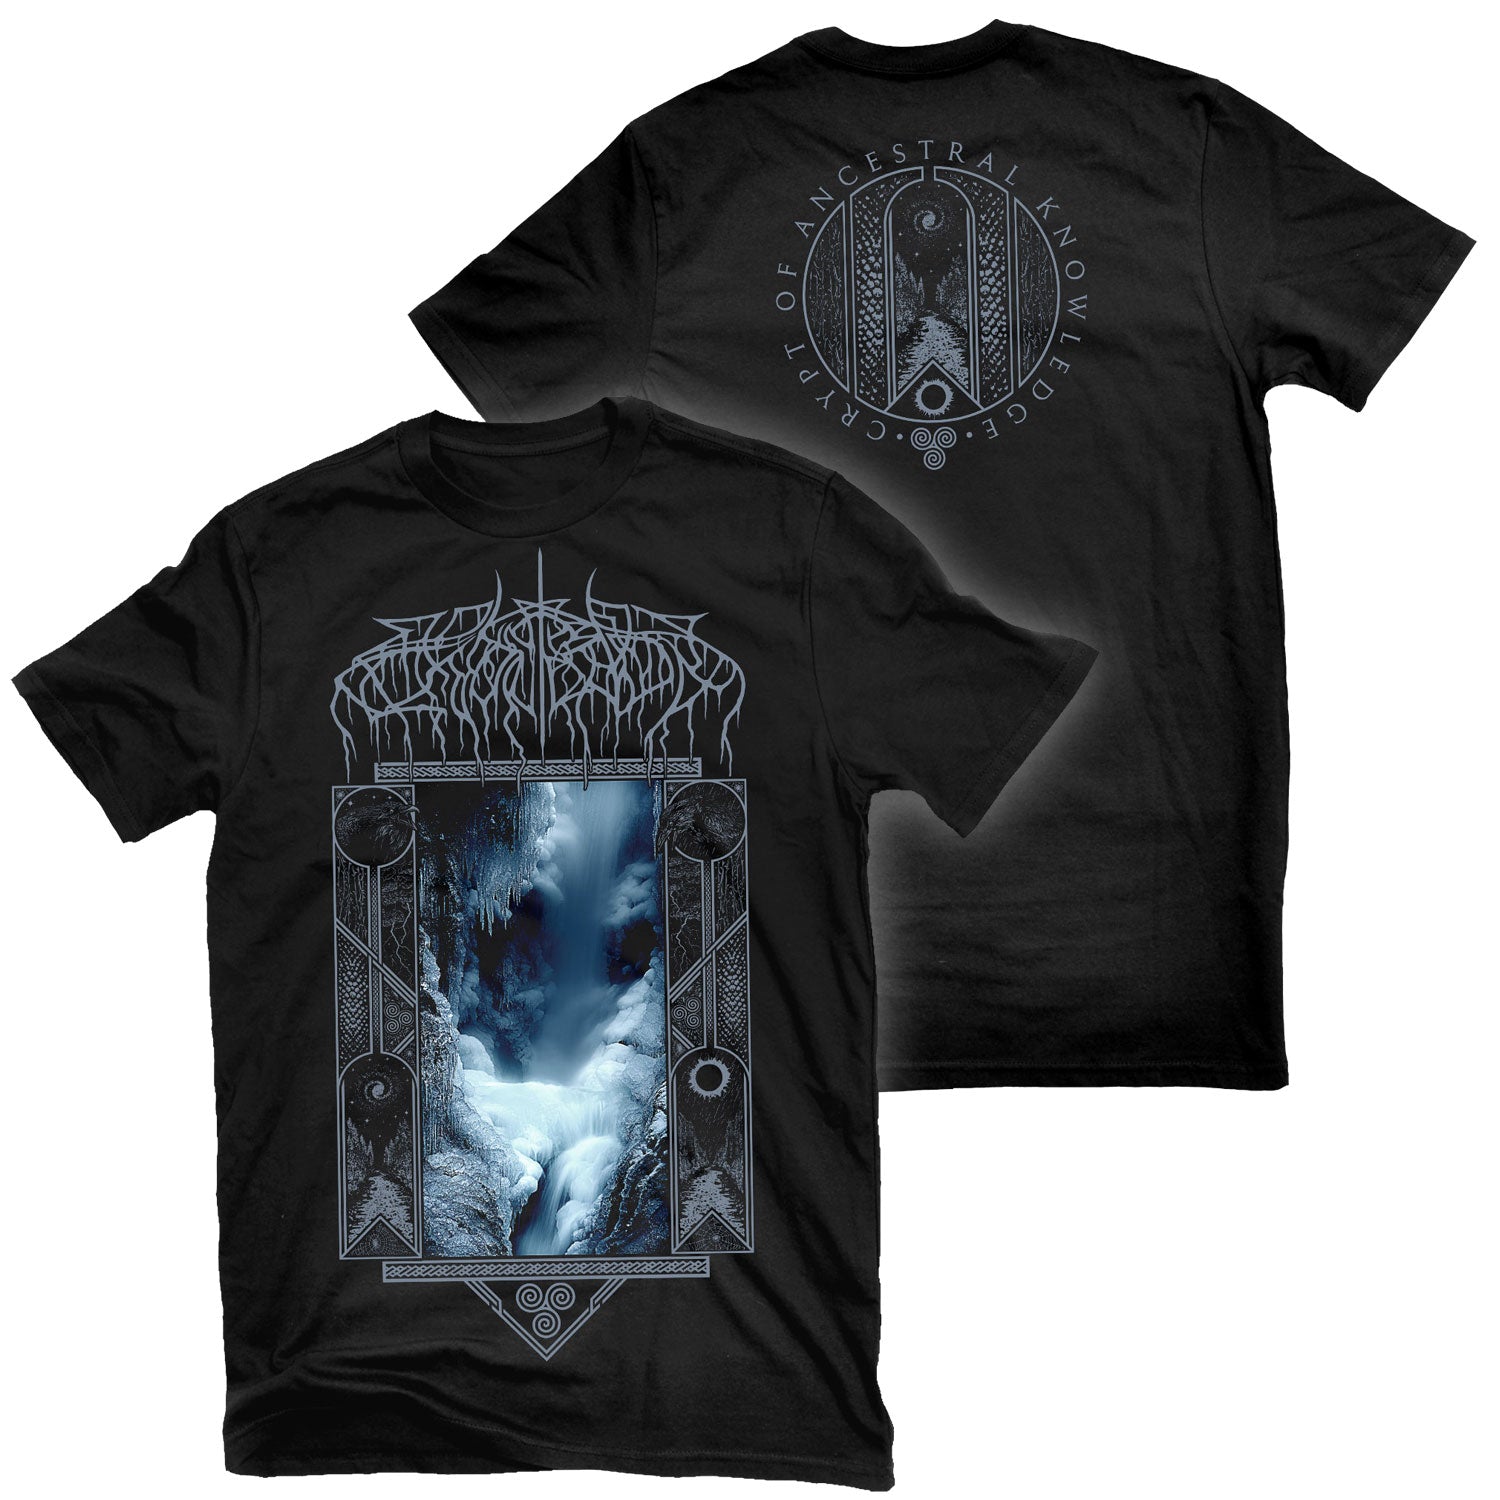 Wolves In The Throne Room "Crypt Of Ancestral Knowledge" T-Shirt